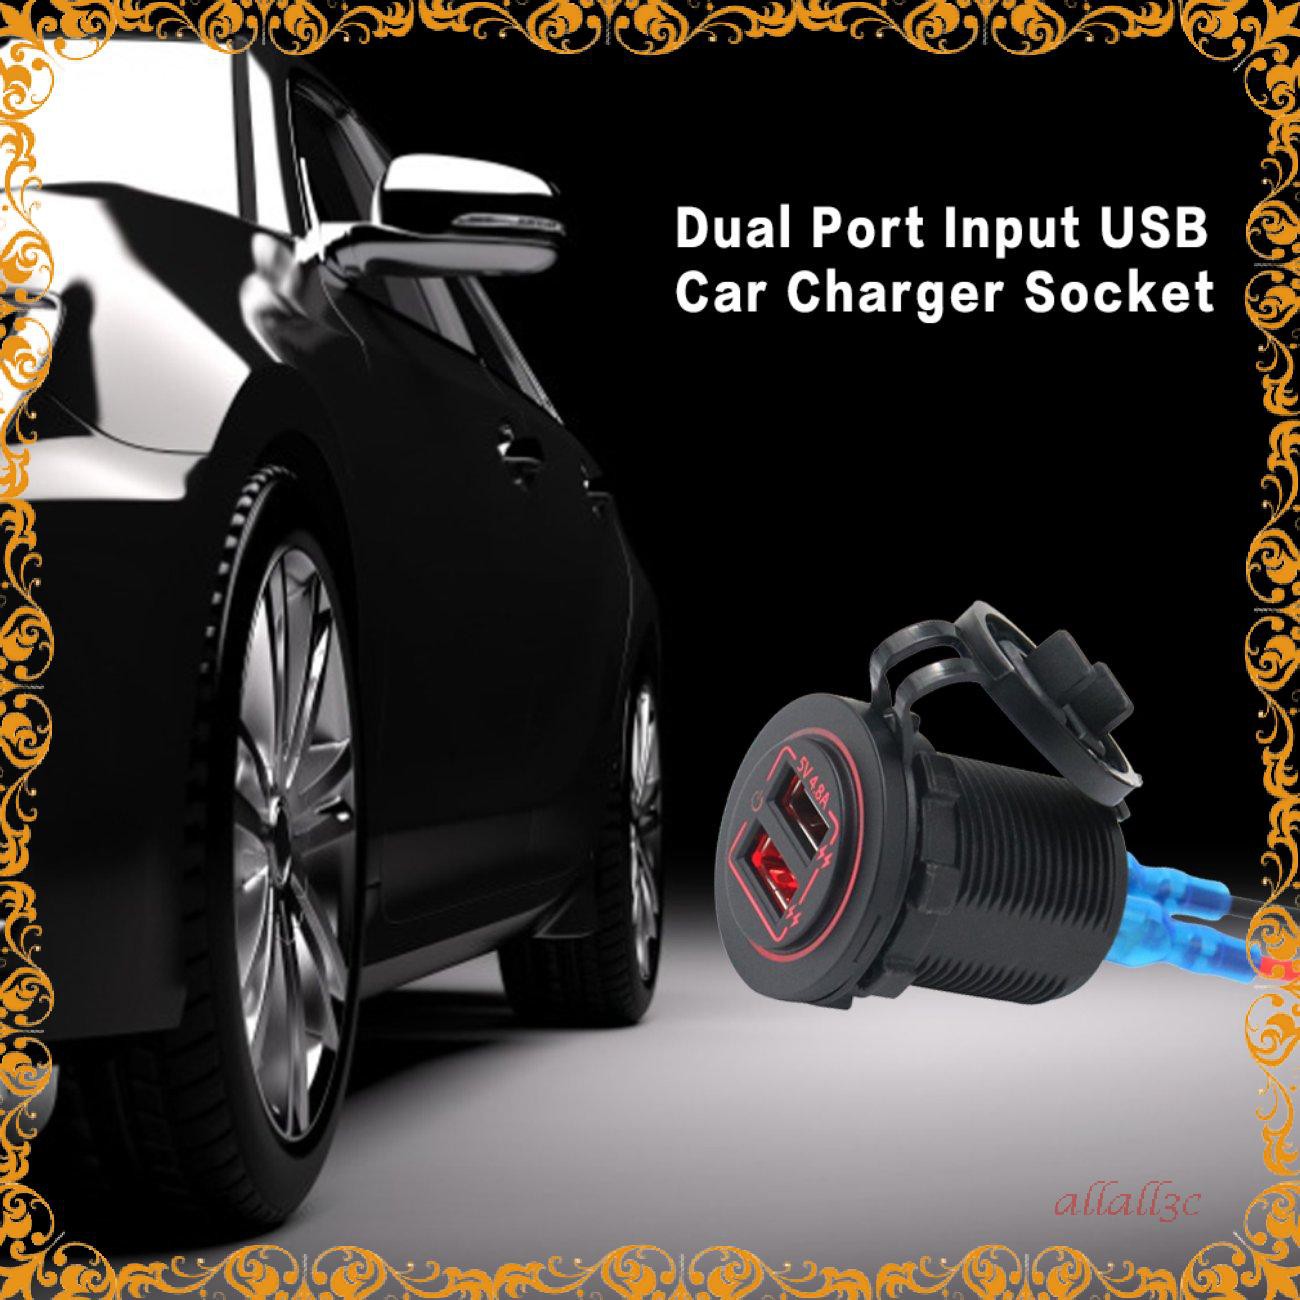 Dual Port Input USB Car Charger Socket 4.8A 5V Red Light Touch Button Switch[╭(′▽`)╭(′▽`)╯]